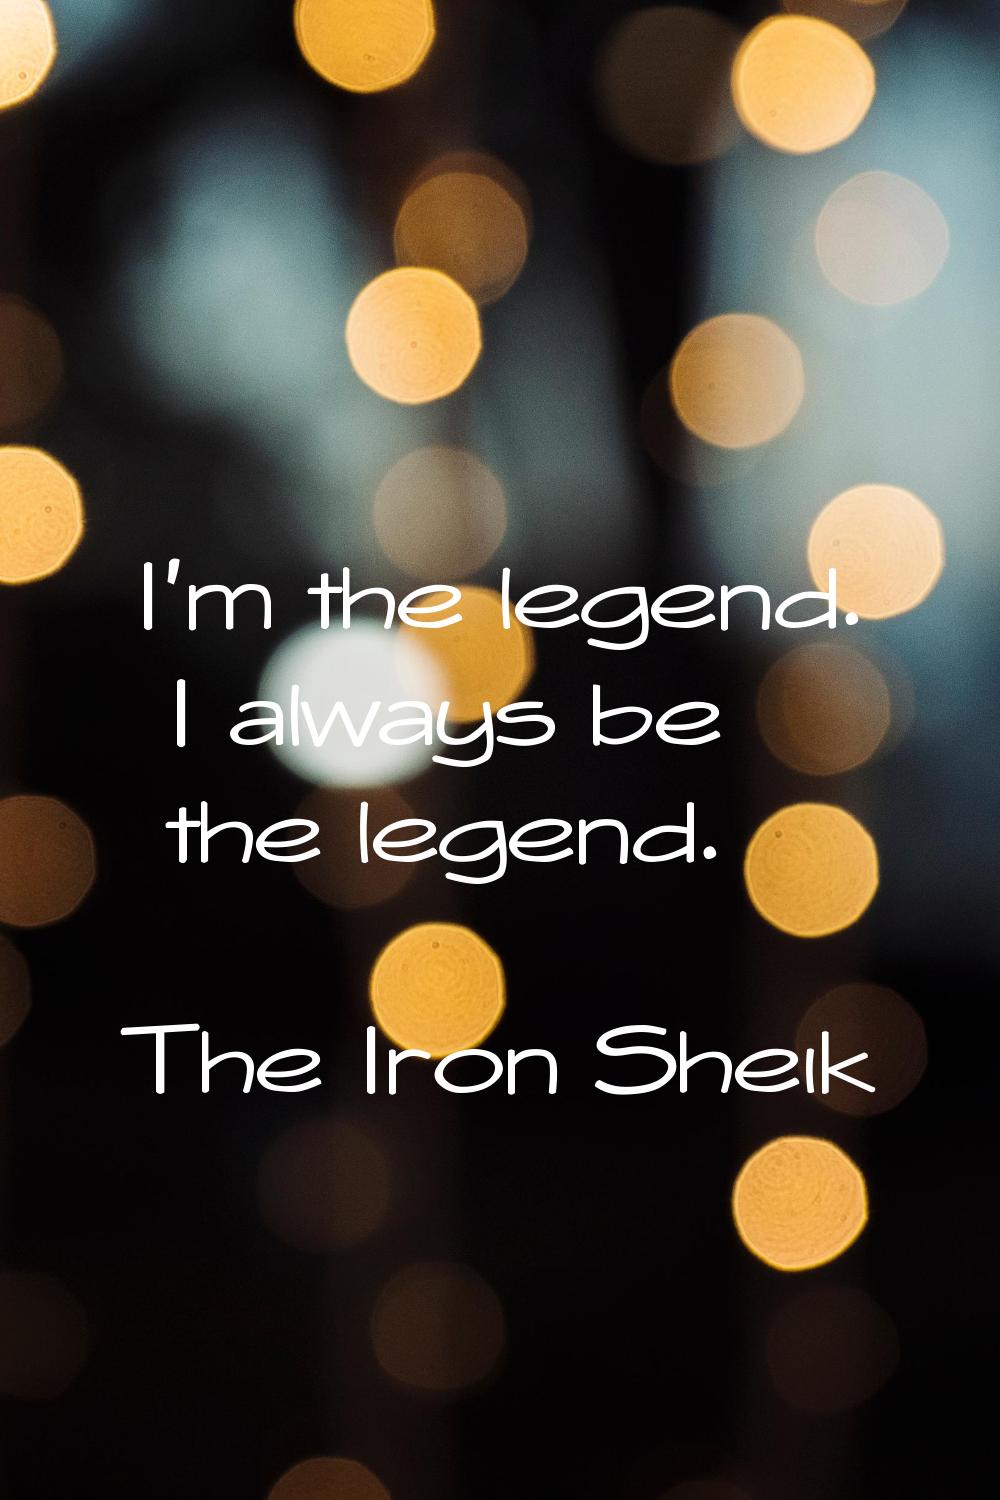 I'm the legend. I always be the legend.